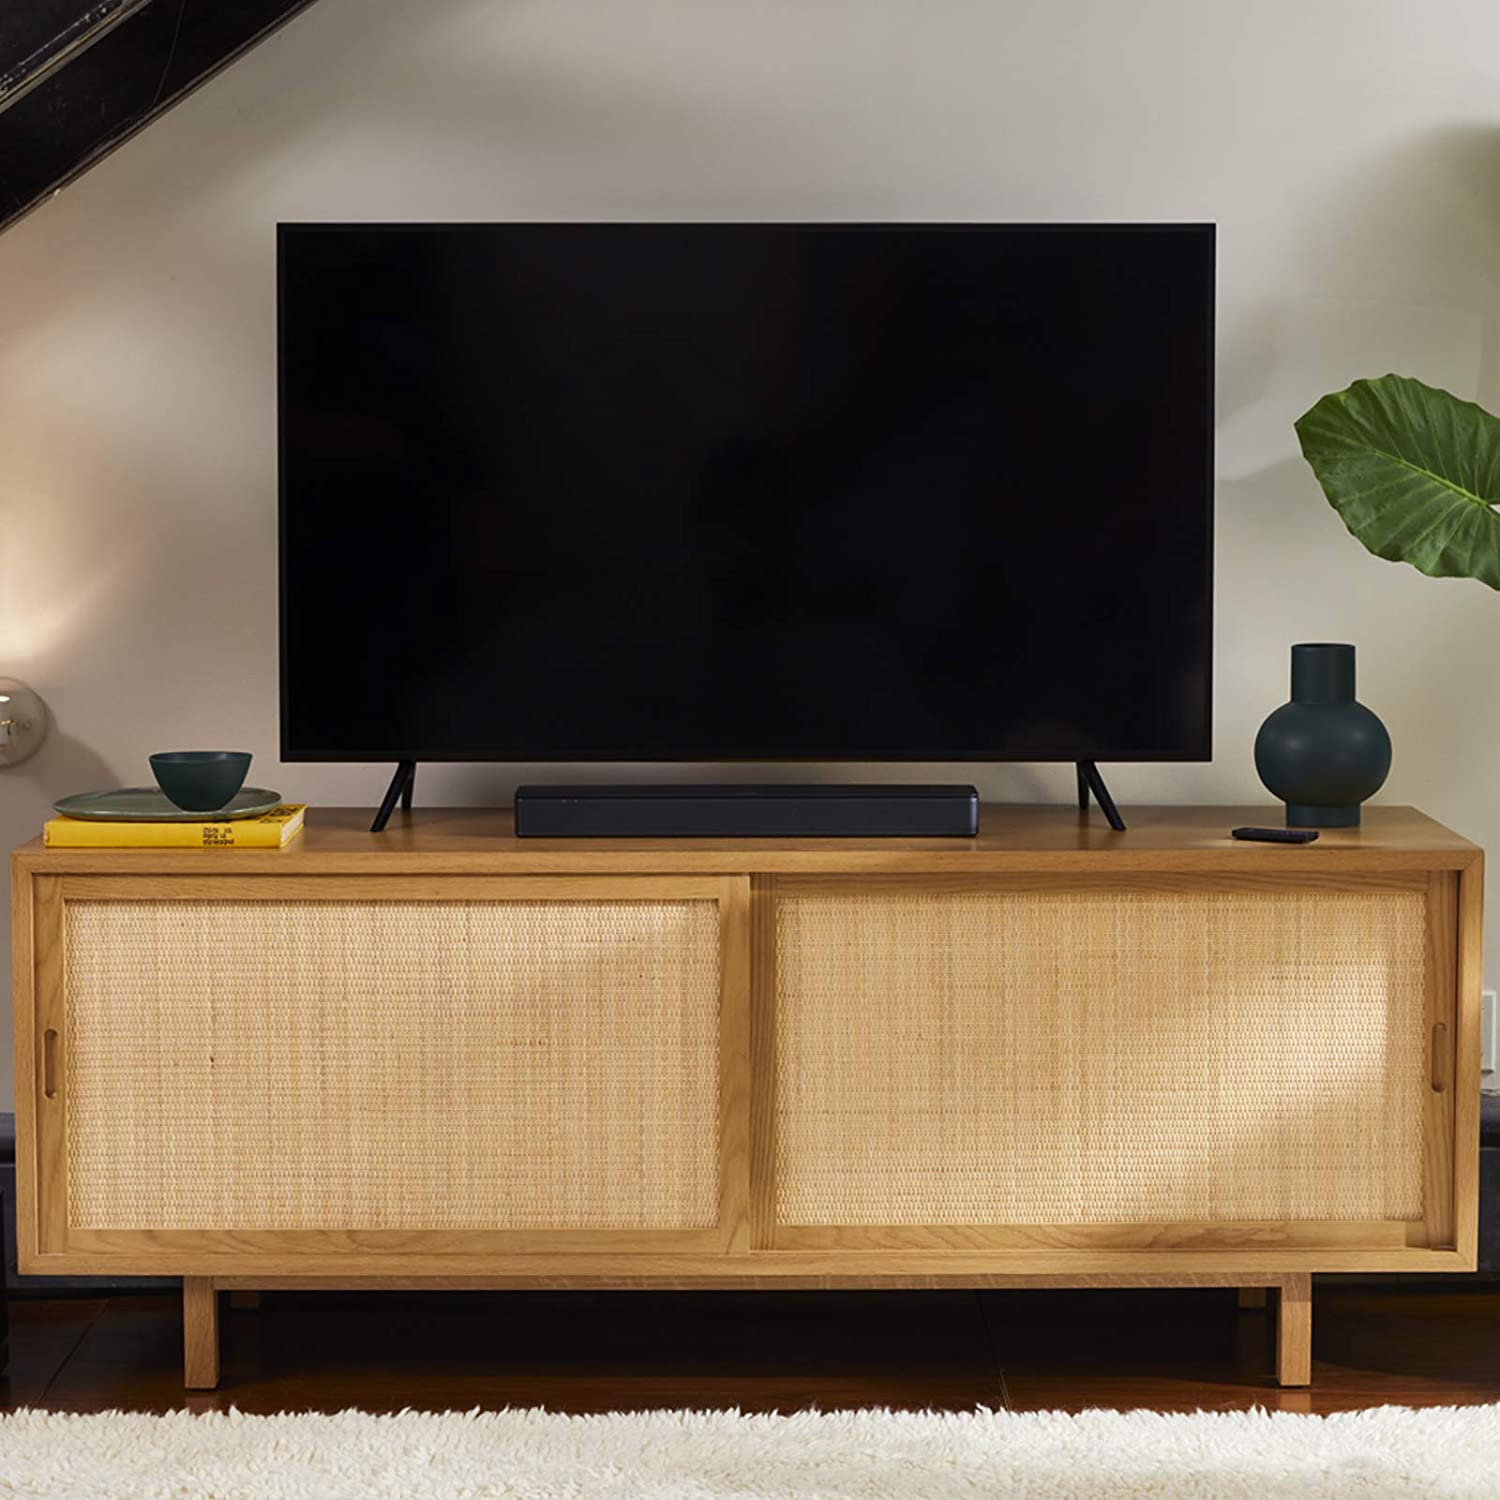 Bose TV Speaker: Features, Reviews, and Price - Techidence